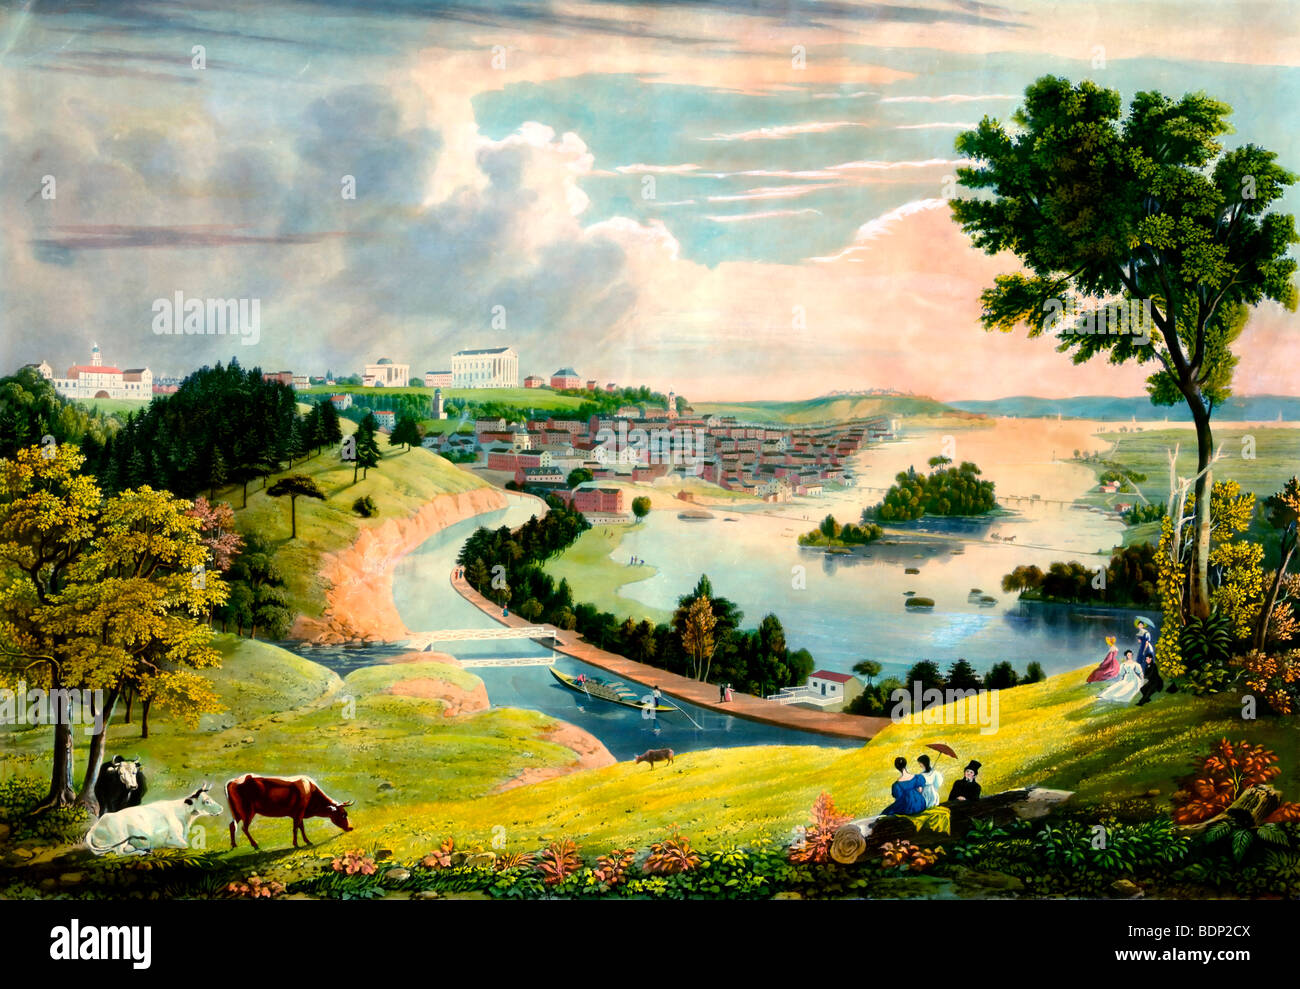 View of Richmond, Virginia, and James River, with two men transporting logs on boat, and people and cattle in foreground. Stock Photo